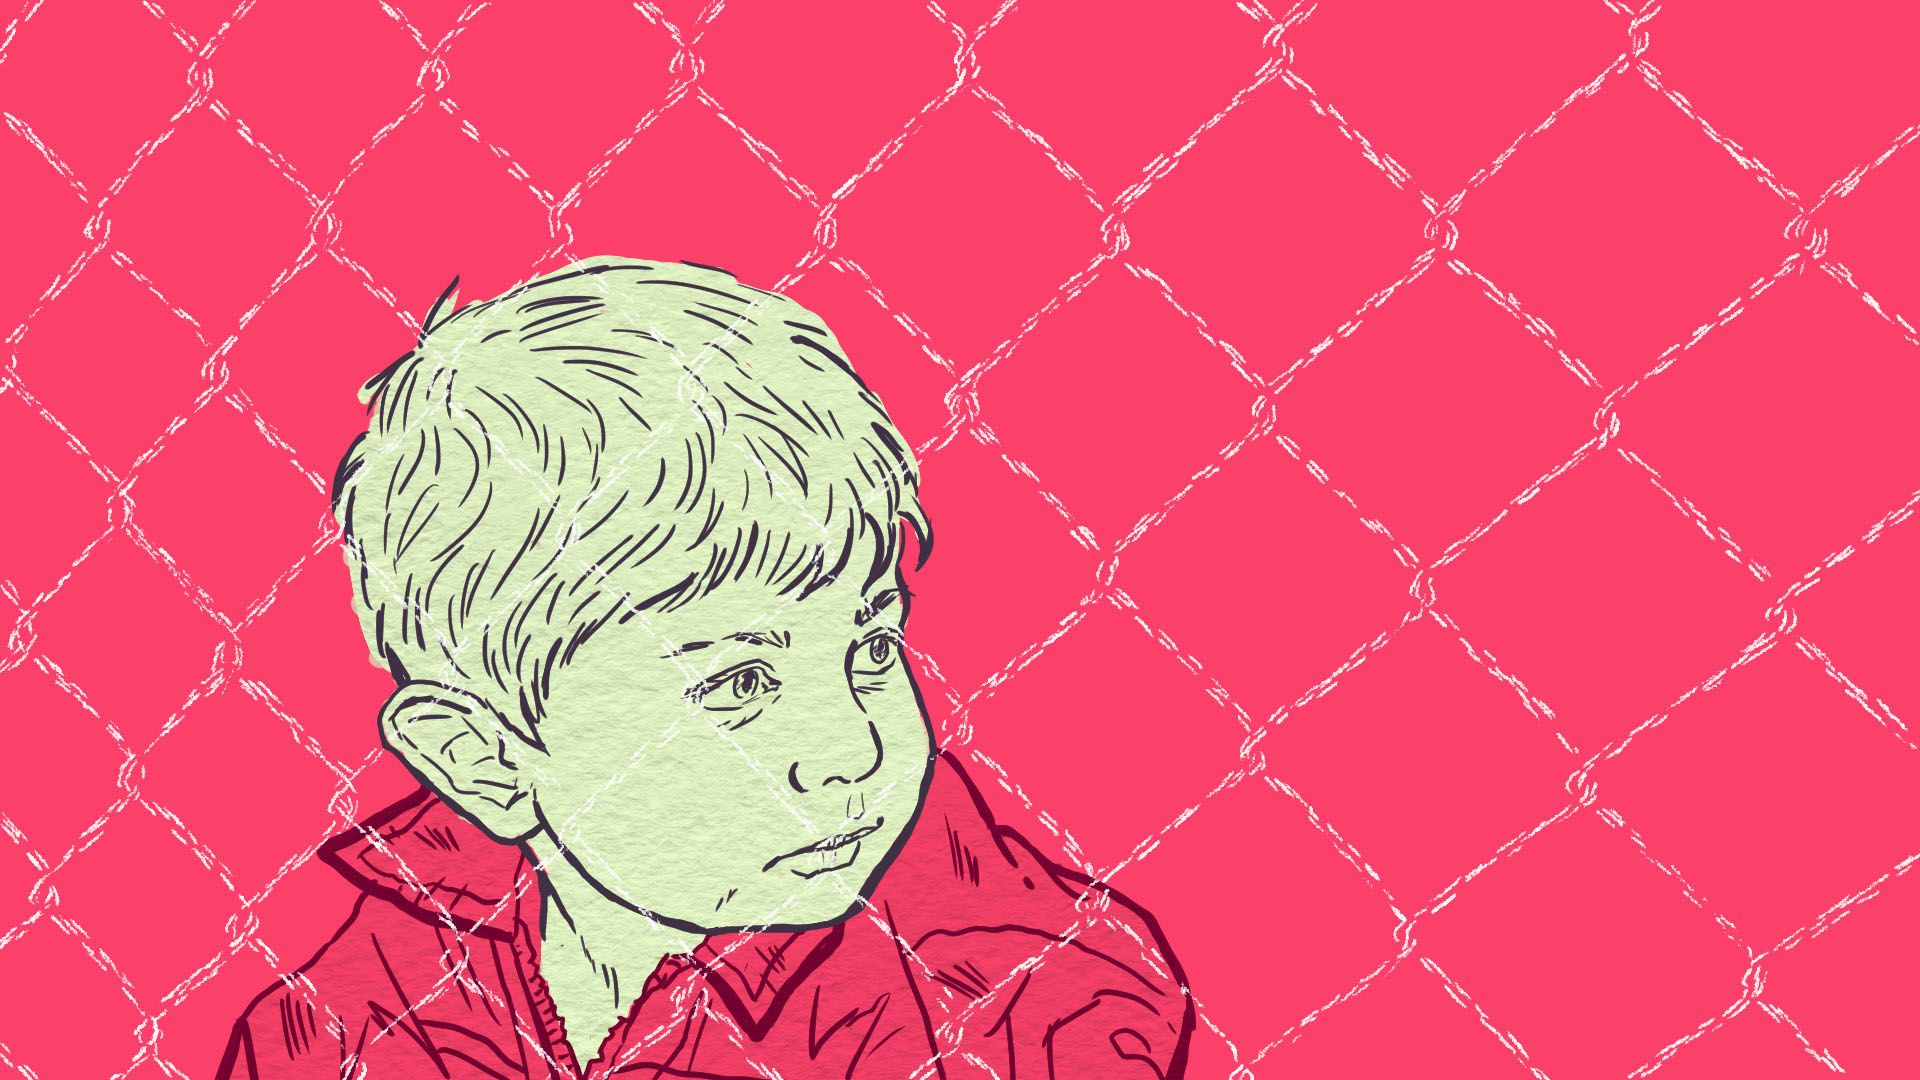 An illustration of a child with a wire fencing in the foreground. It is on a hot pink background. 